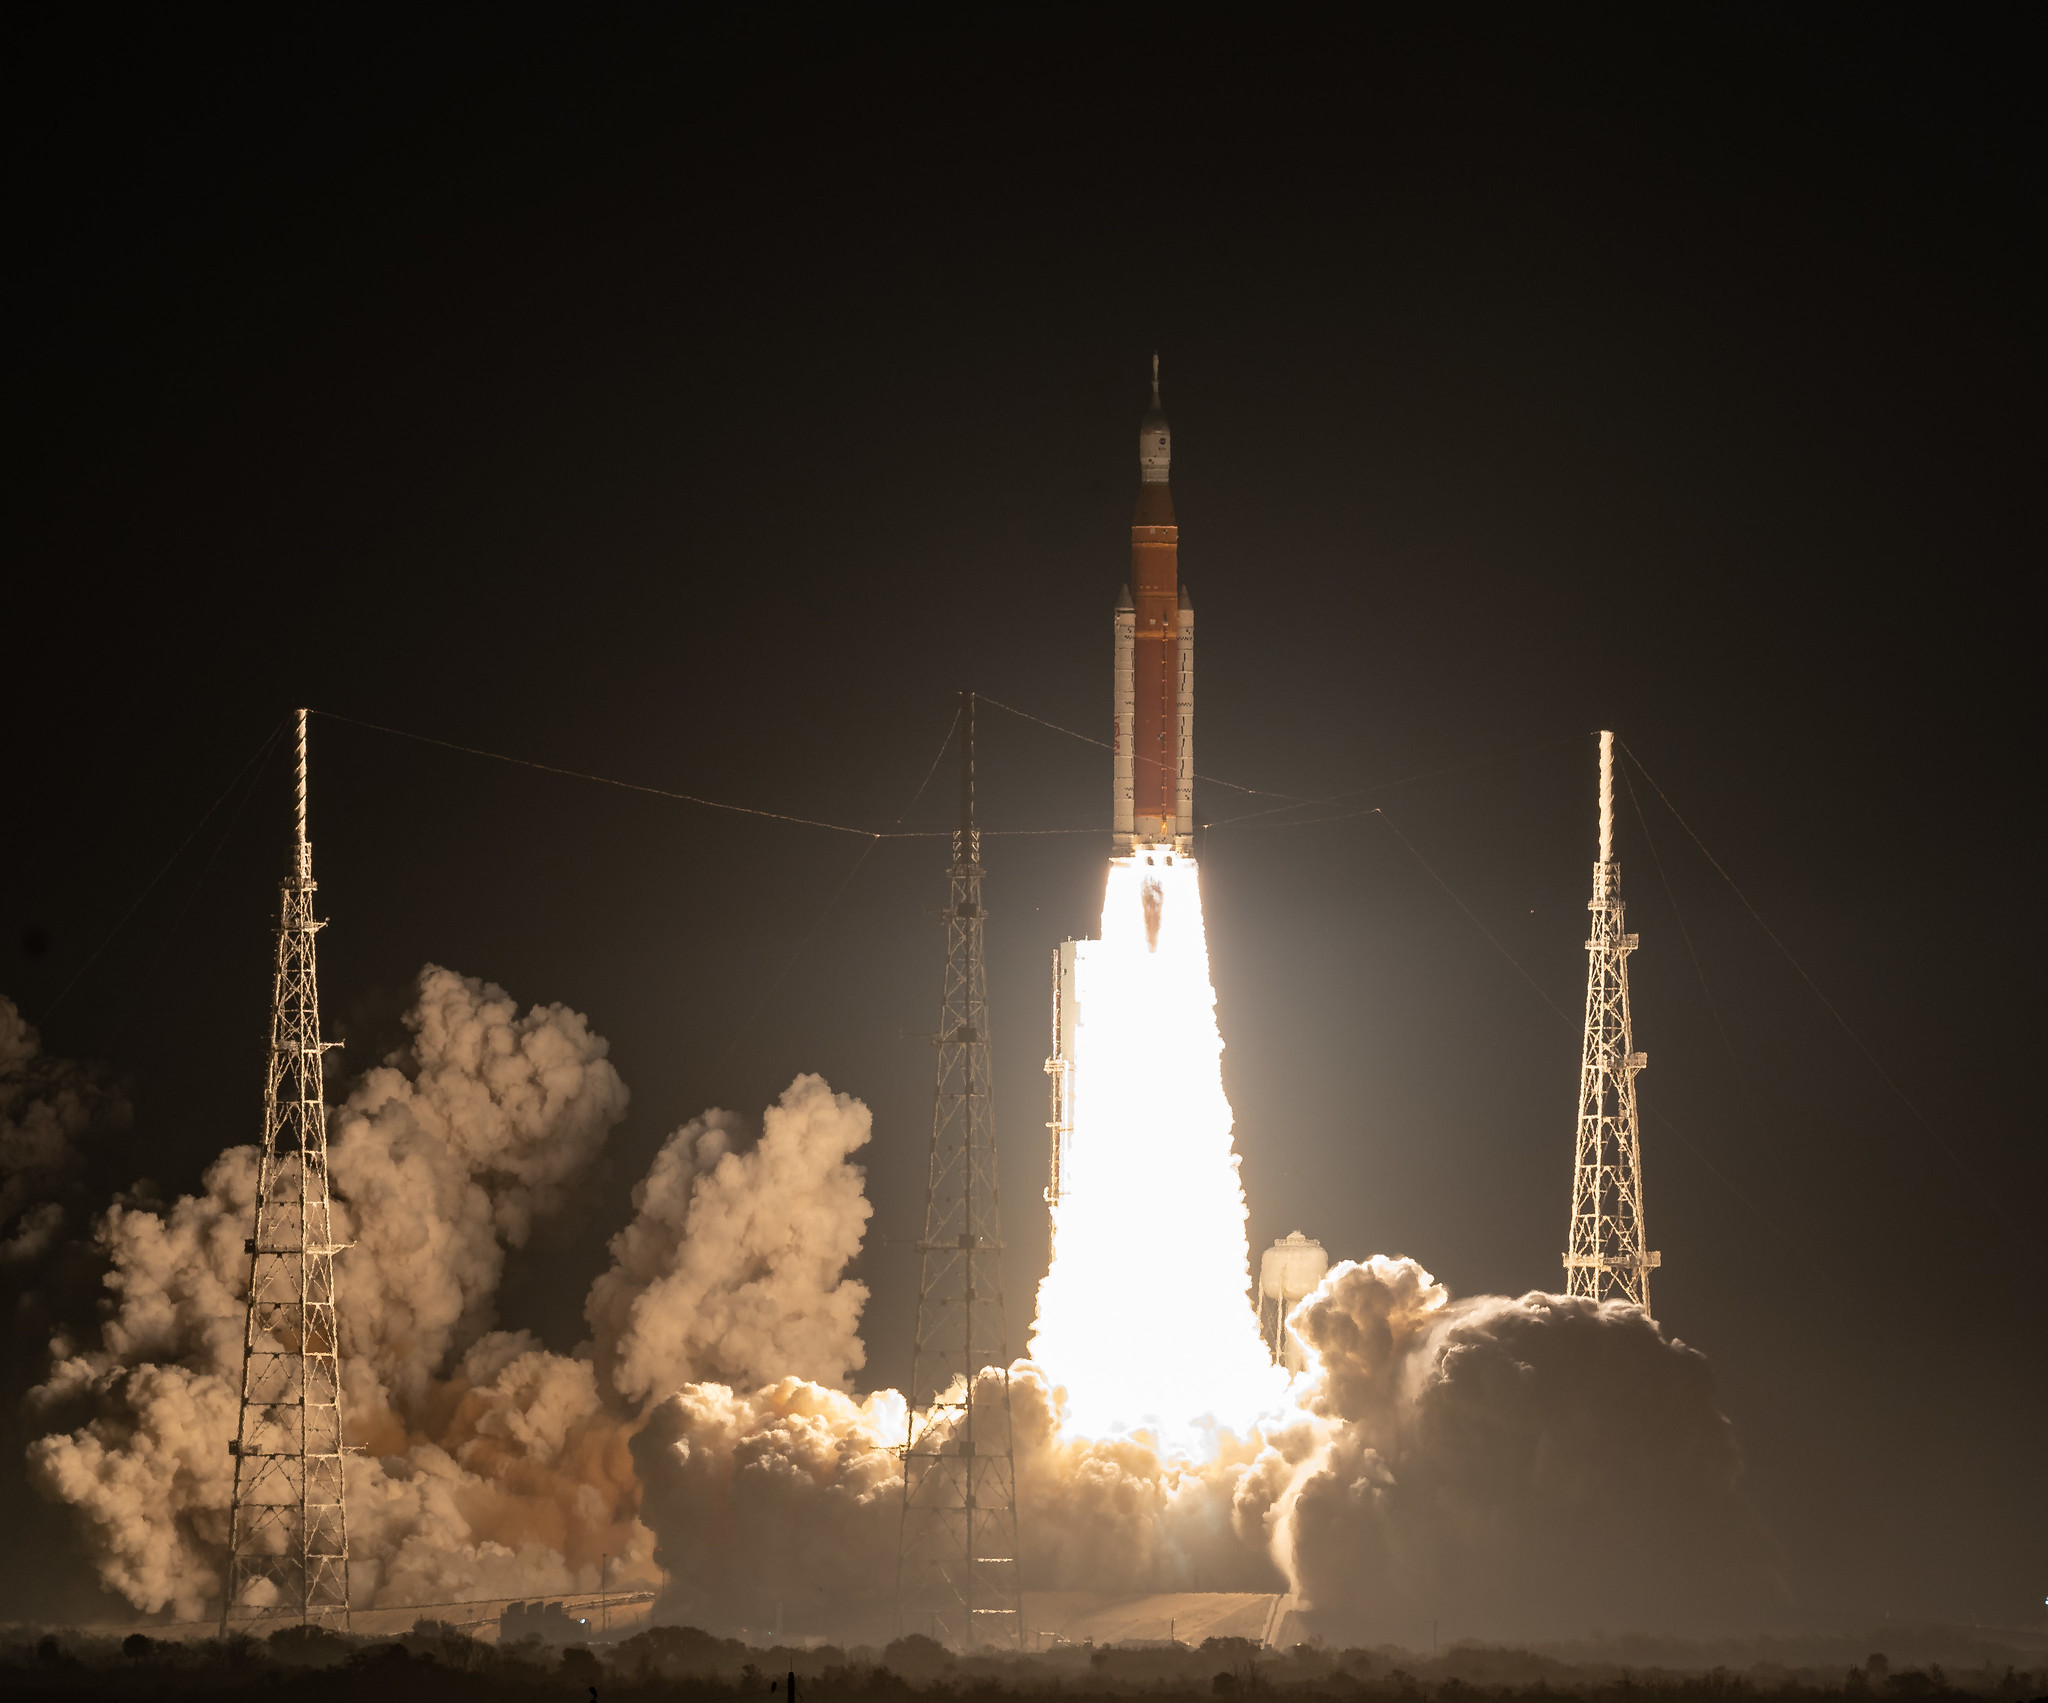 NASA’s Space Launch System rocket carrying the Orion spacecraft launches on the Artemis I flight test, Wednesday, Nov. 16, 2022, from Launch Complex 39B at NASA’s Kennedy Space Center in Florida.